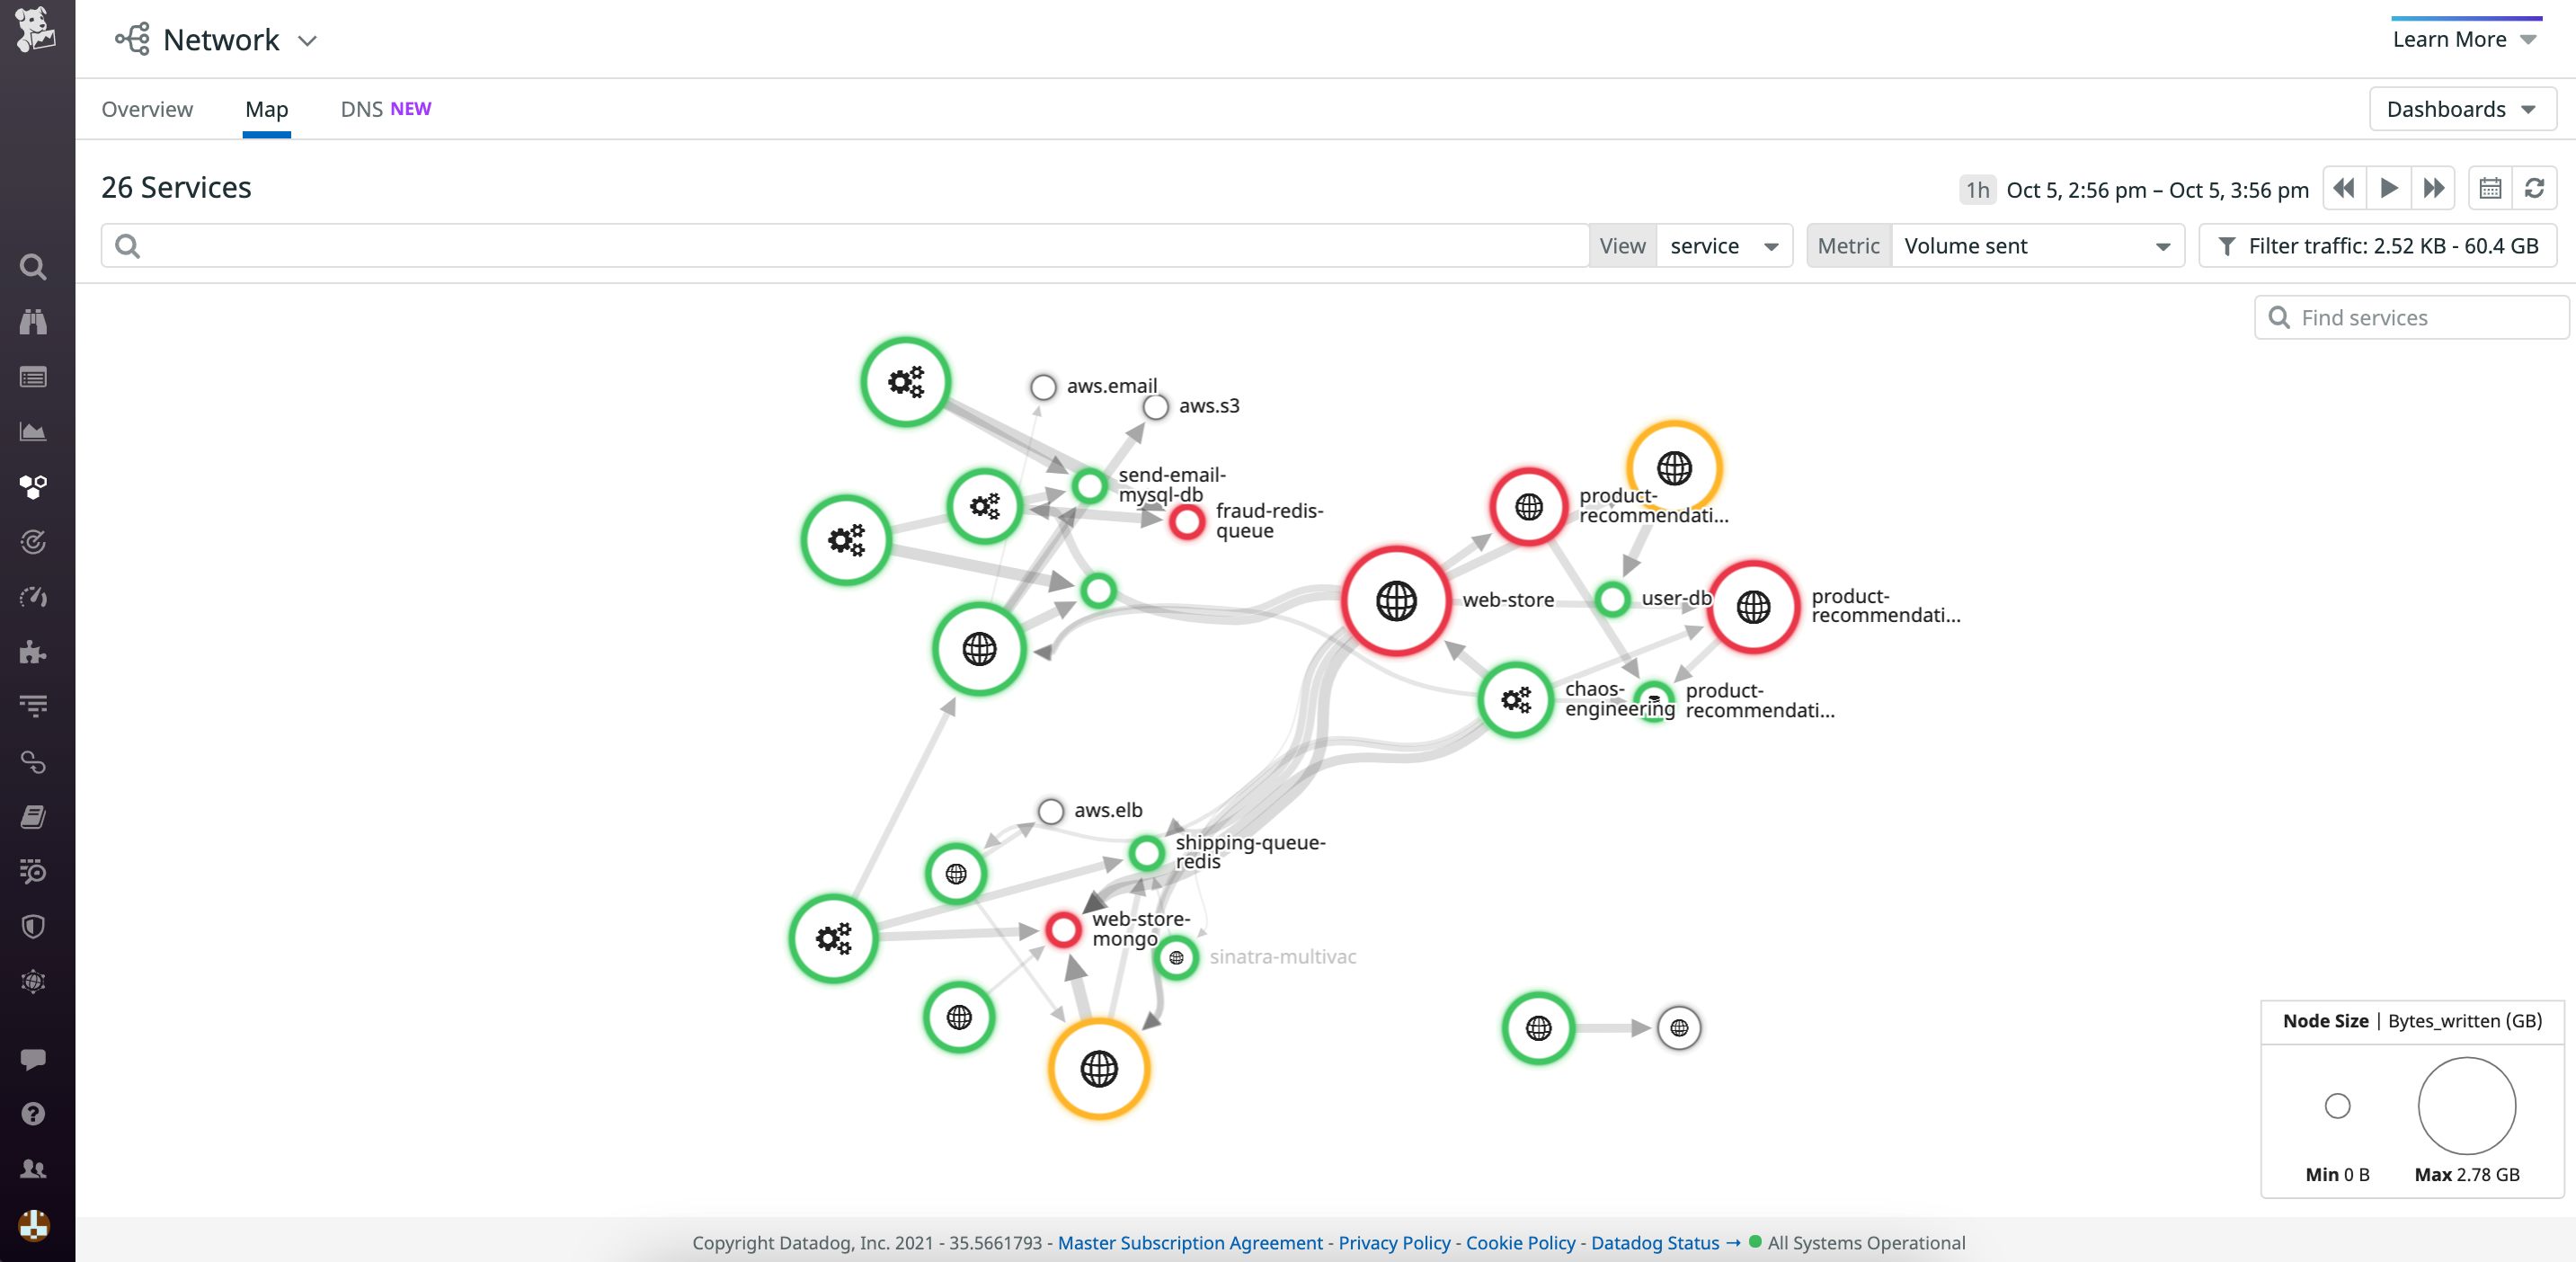 Visualize your entire network in real-time.